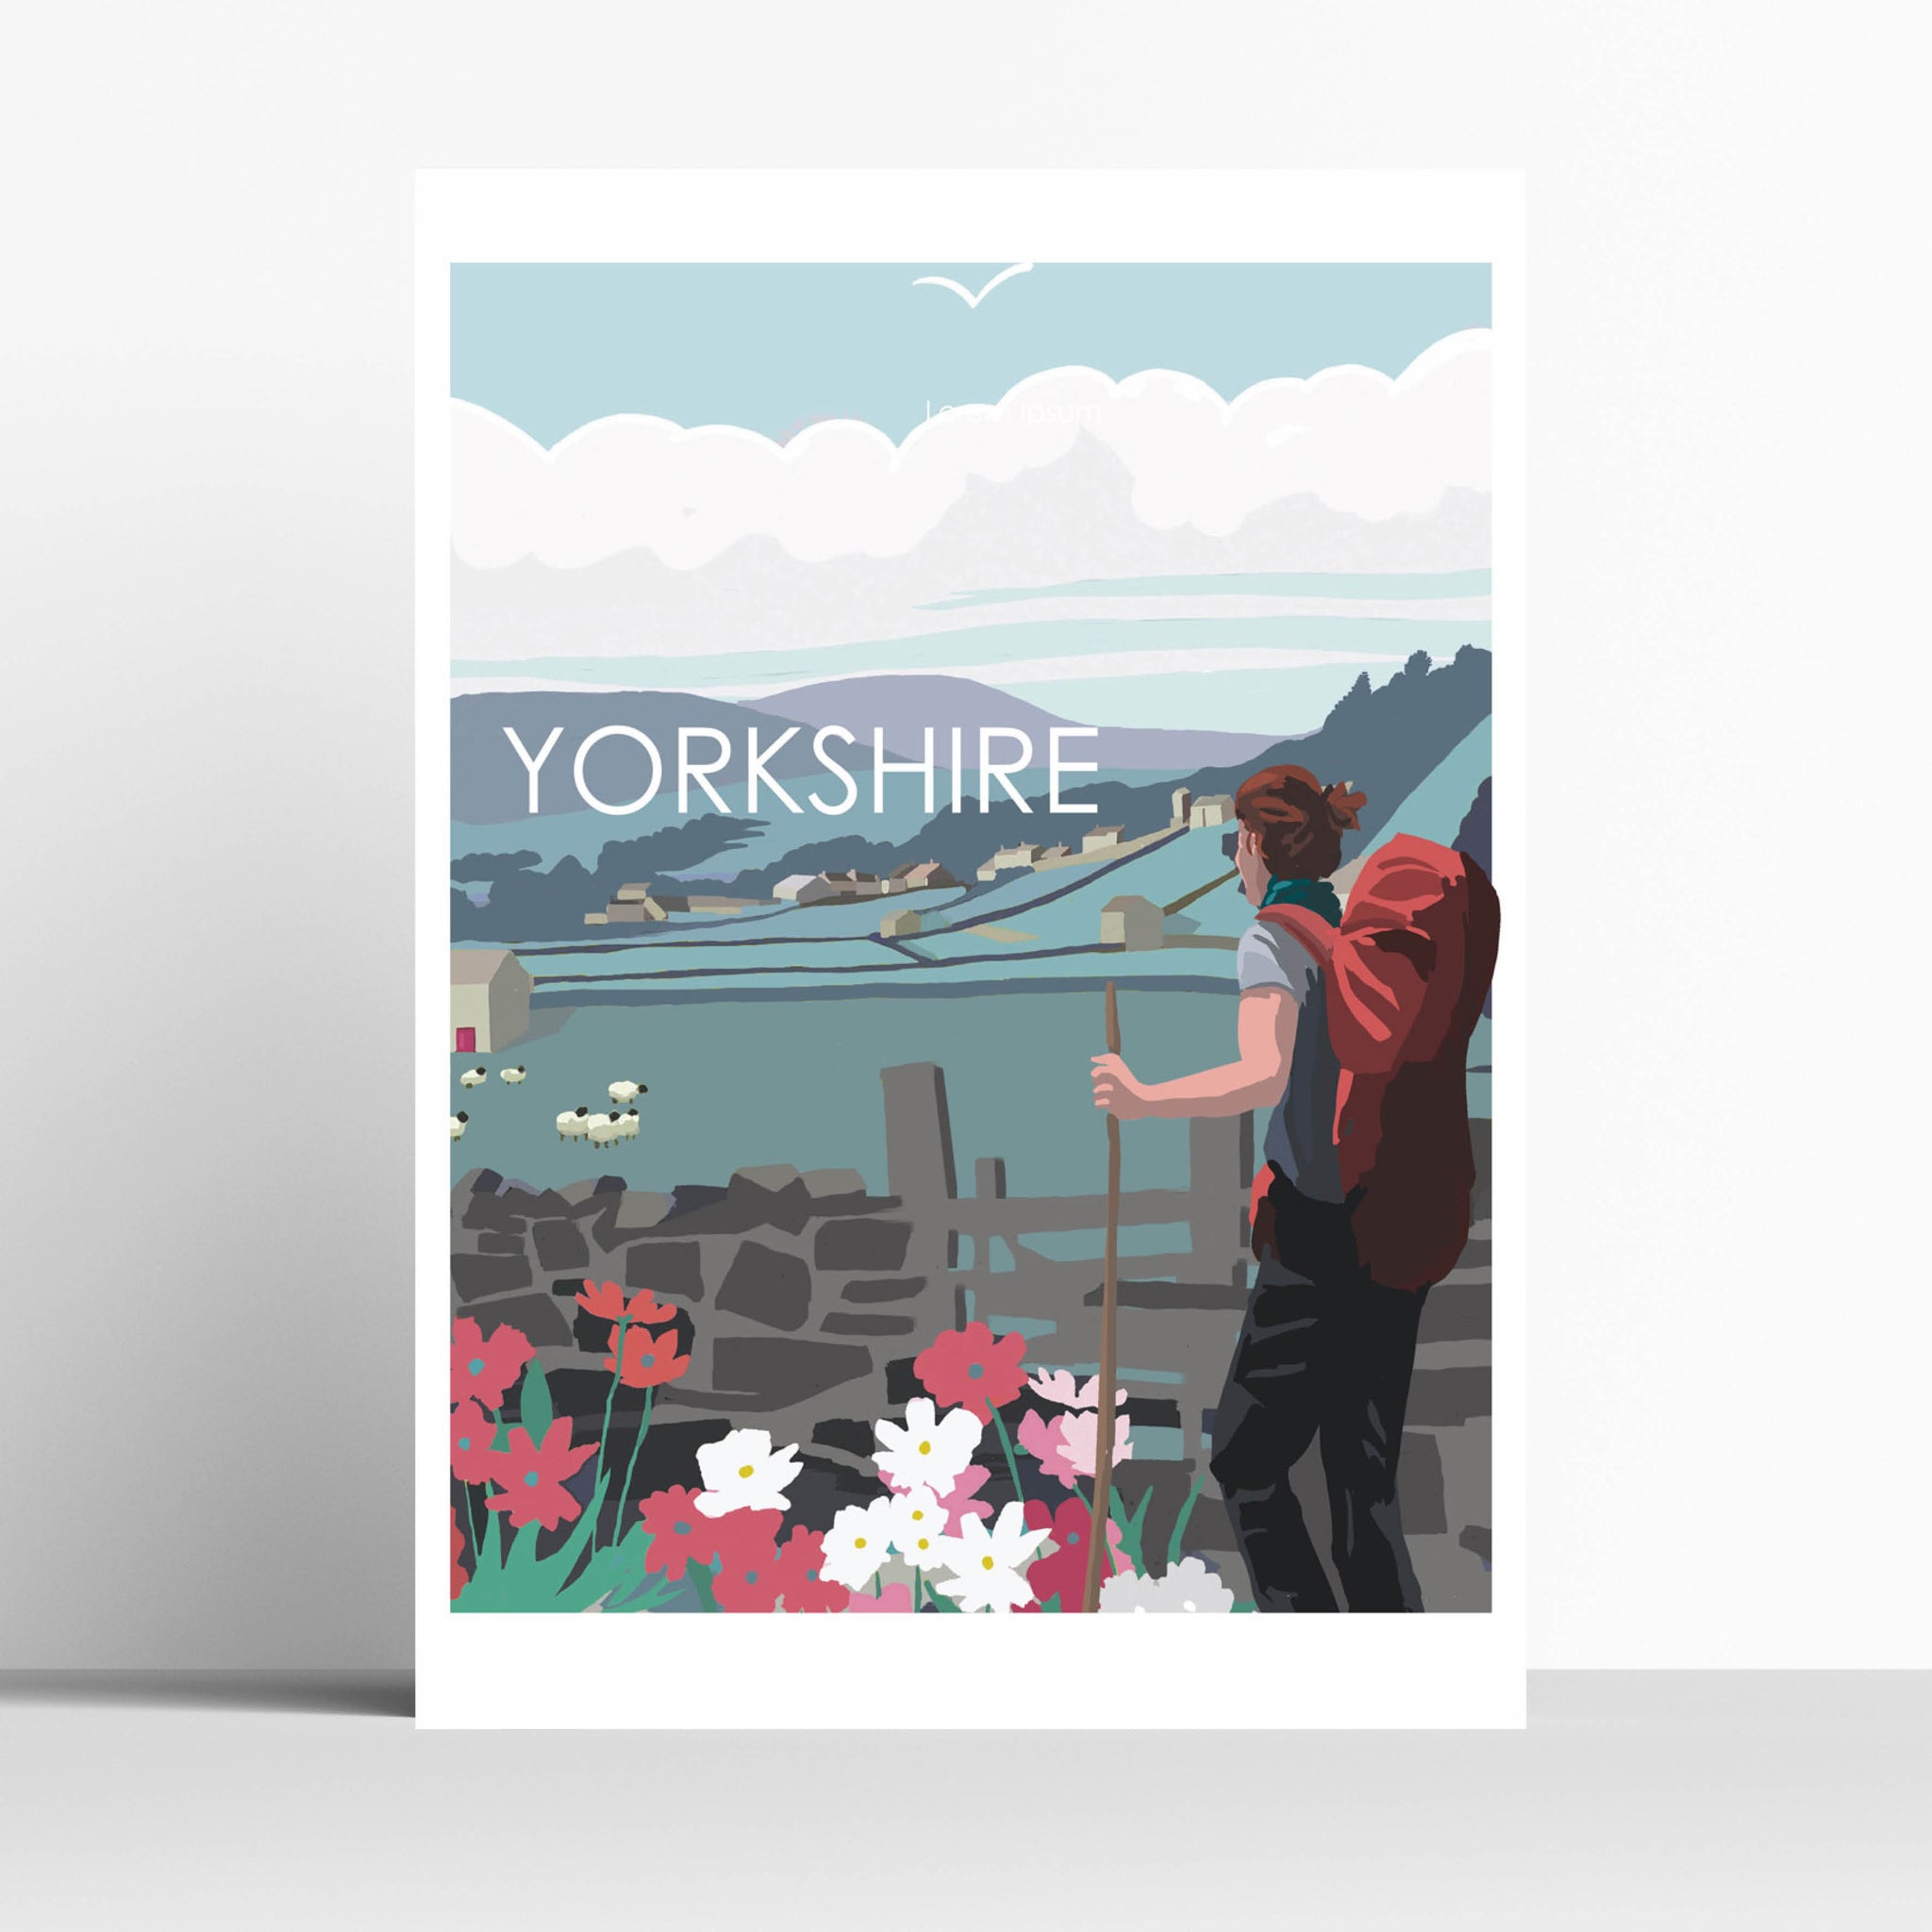 Walking in the Yorkshire Dales Travel Print